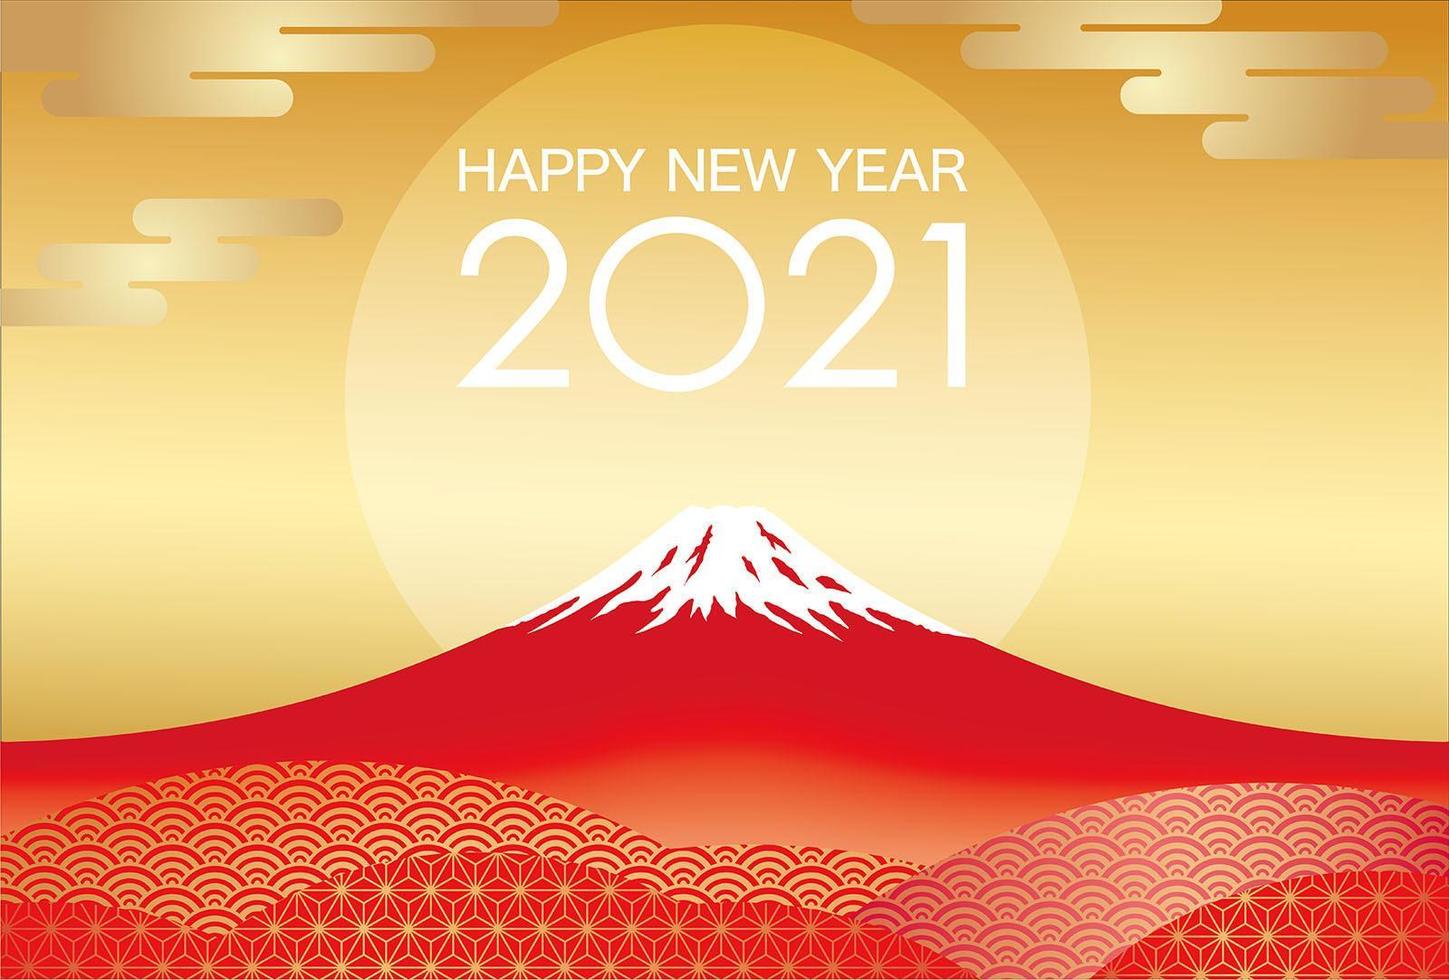 2021 New Years Greeting Card Template with Mt. Fuji vector